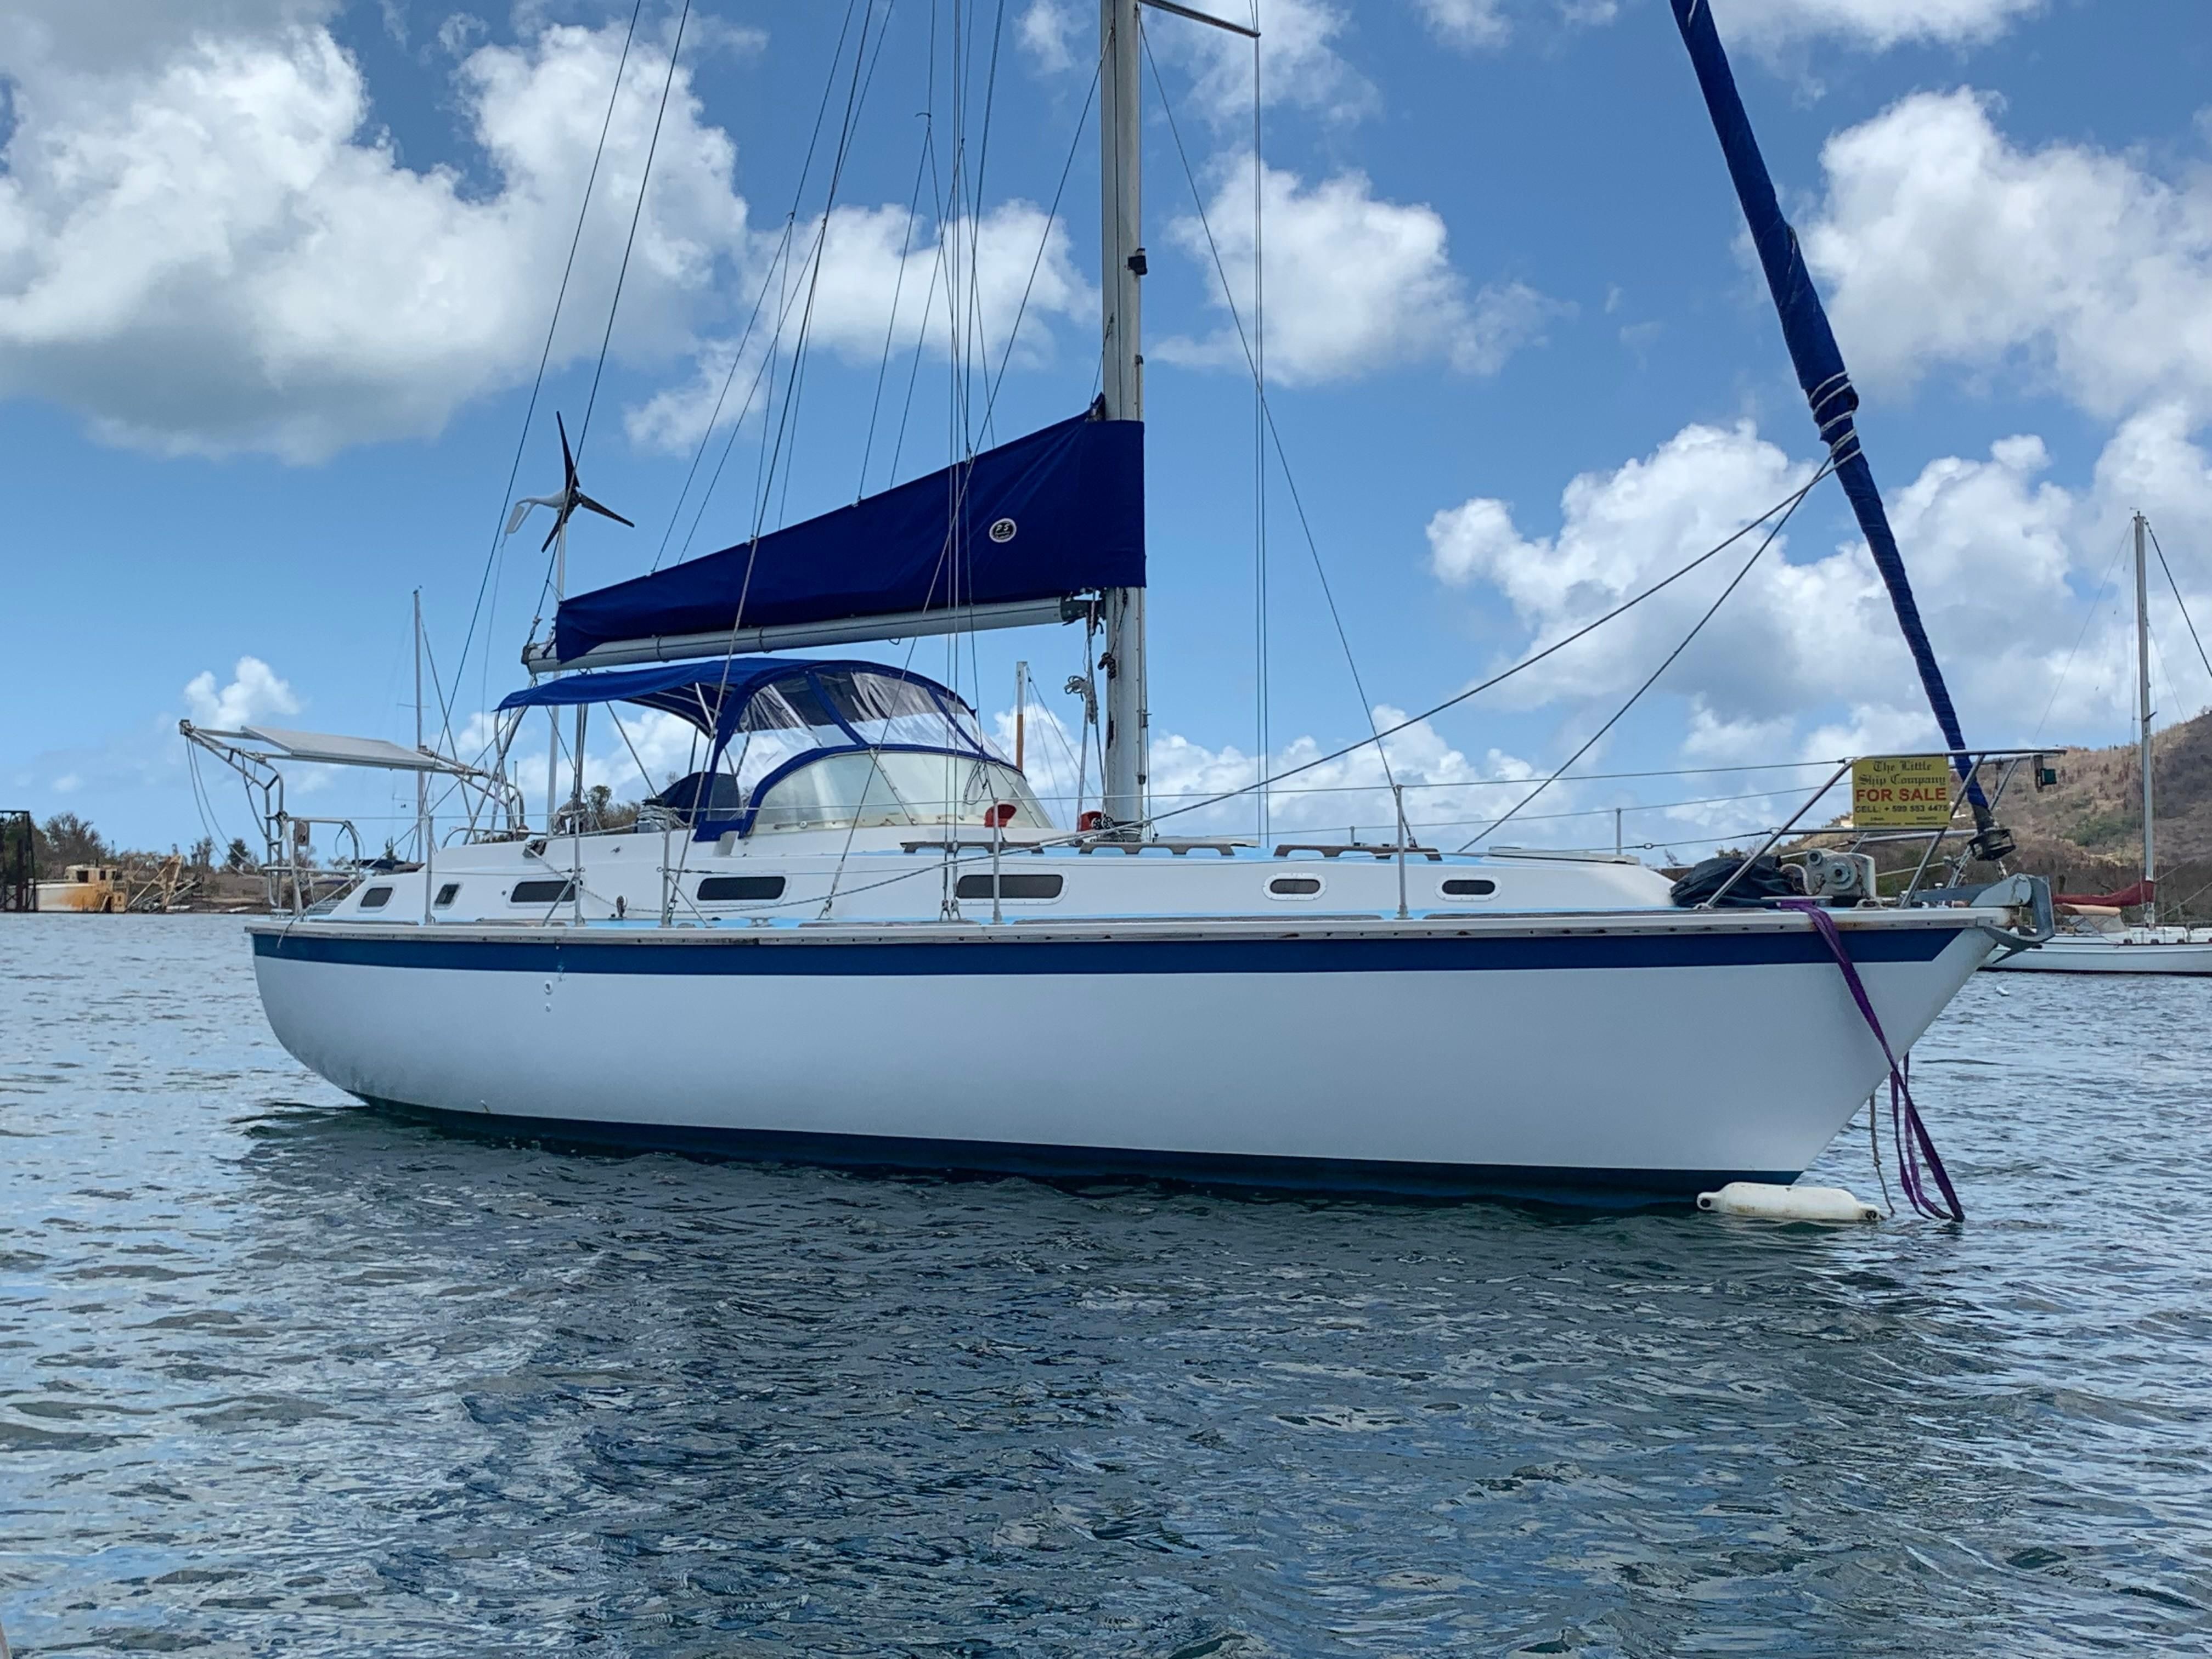 westerly 36 sailboat